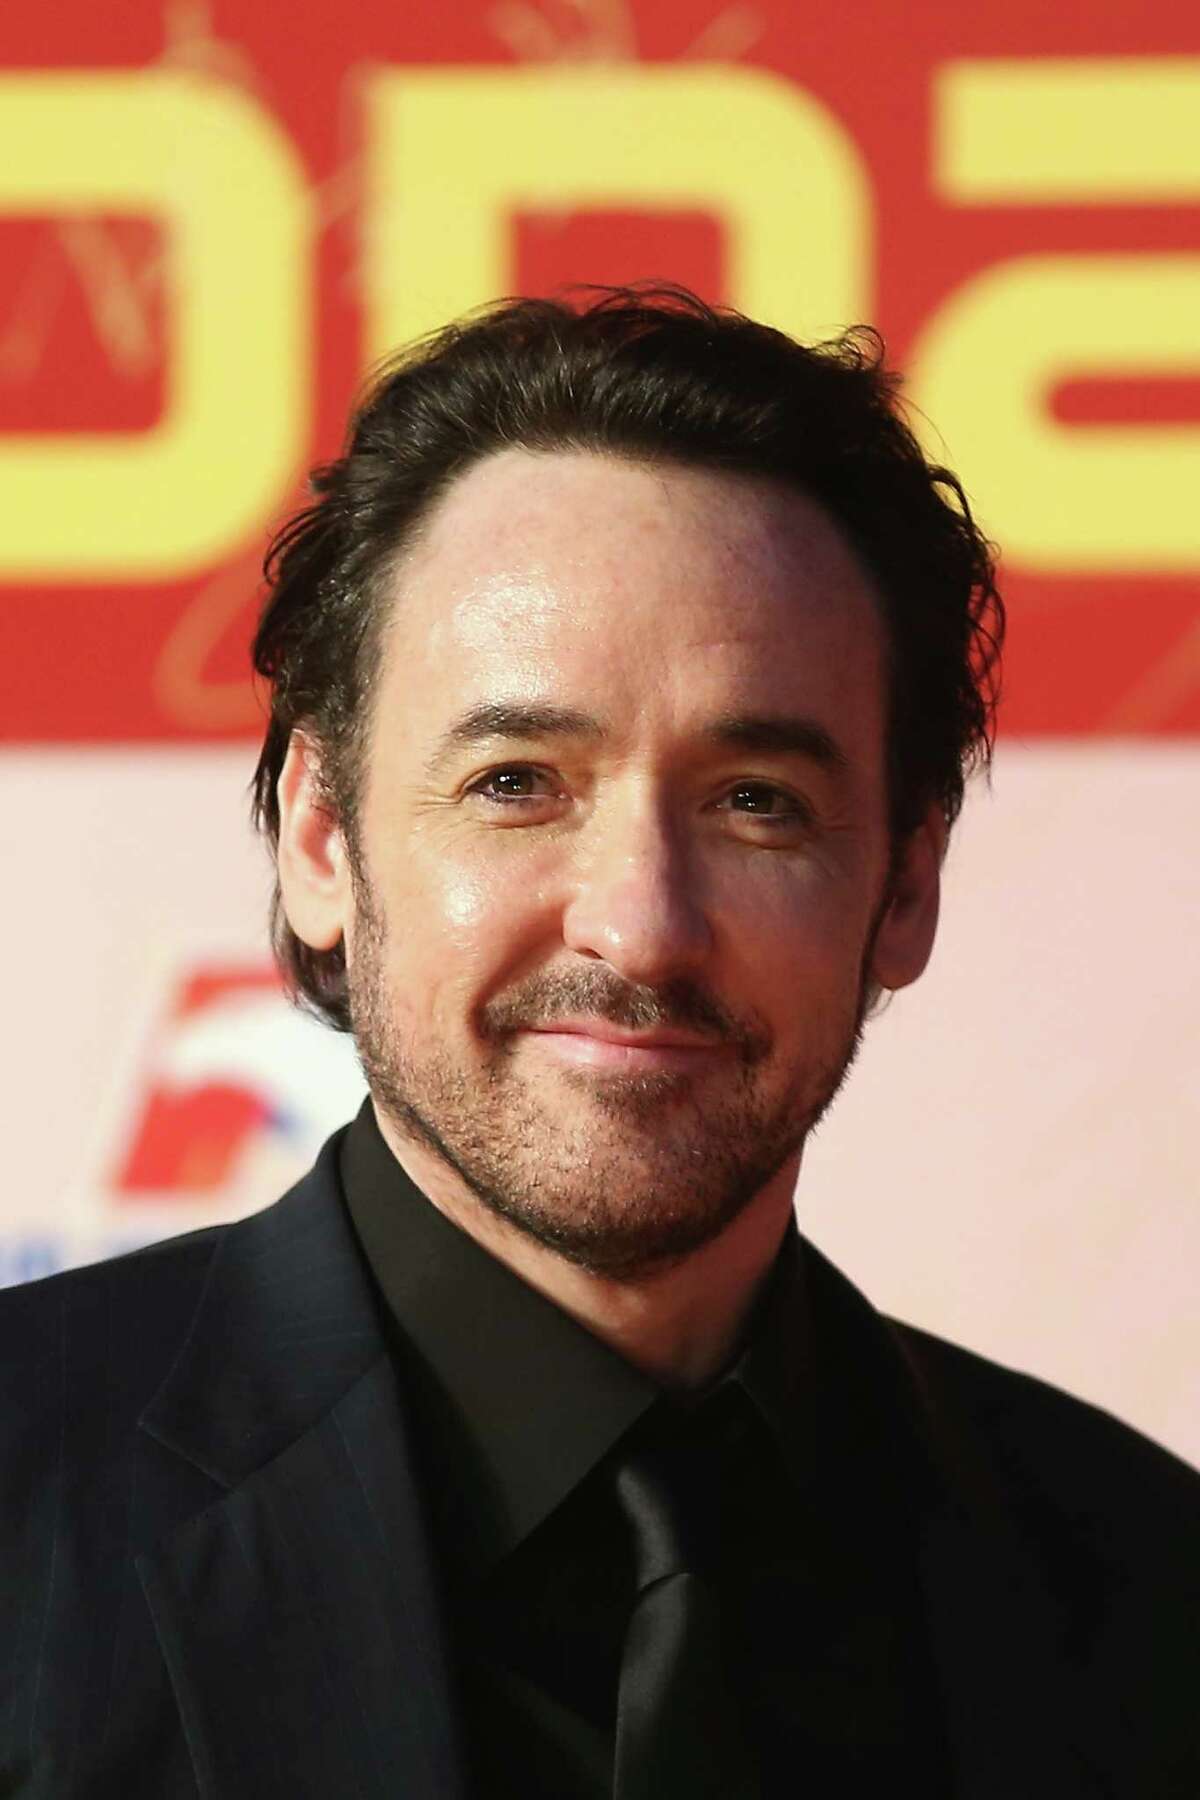 SHANGHAI, CHINA - JUNE 14: Actor John Cusack arrives for the red carpet of the 17th Shanghai International Film Festival at Shanghai Grand Theatre on June 14, 2014 in Shanghai, China. (Photo by Feng Li/Getty Images)